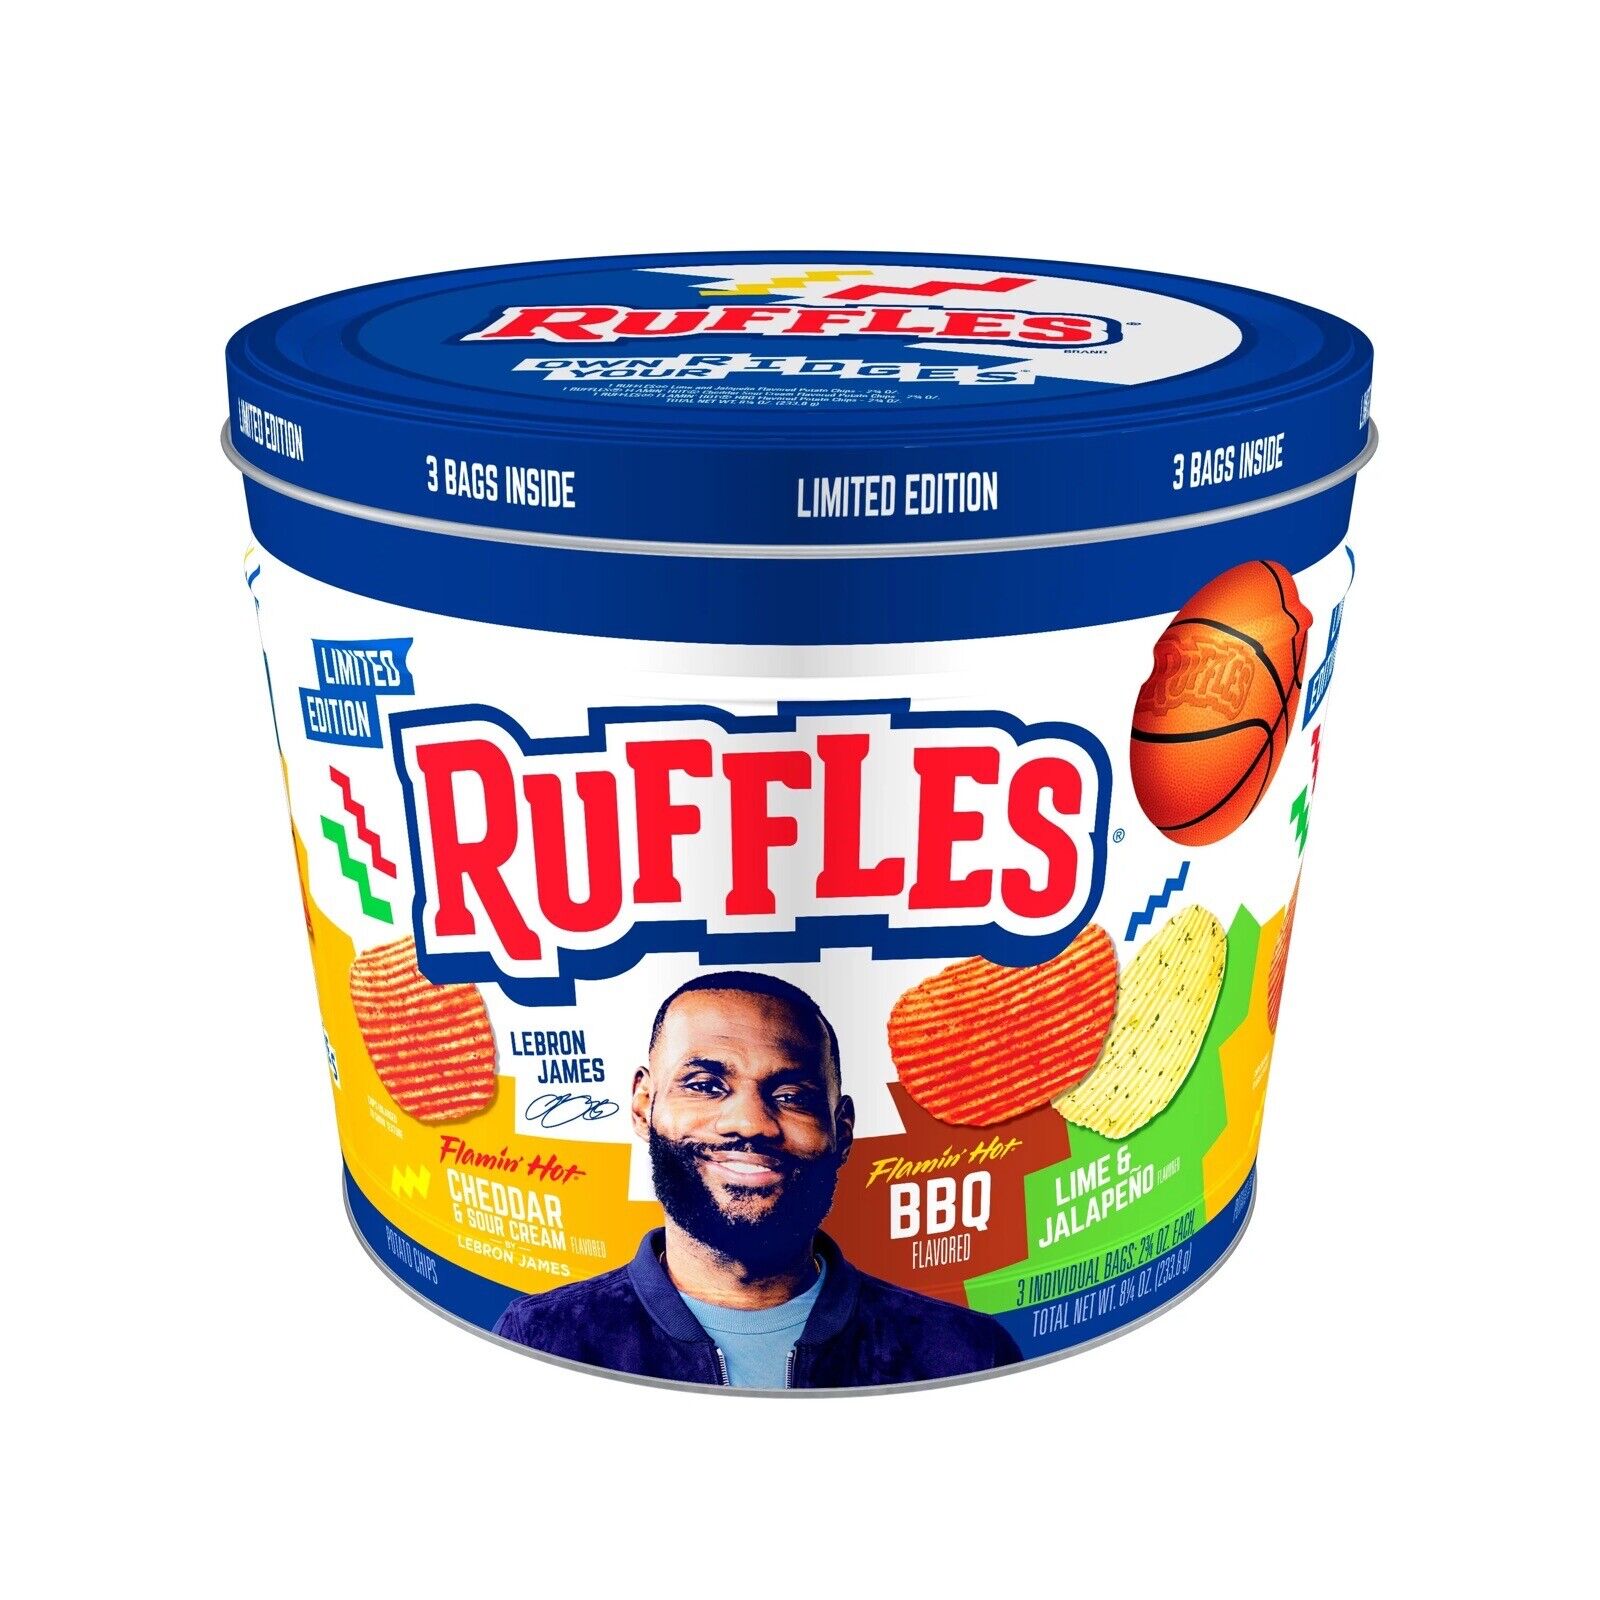 NEW Collectible Lebron James Ruffles Potato Chip Tin 3 Bags Limited Edition